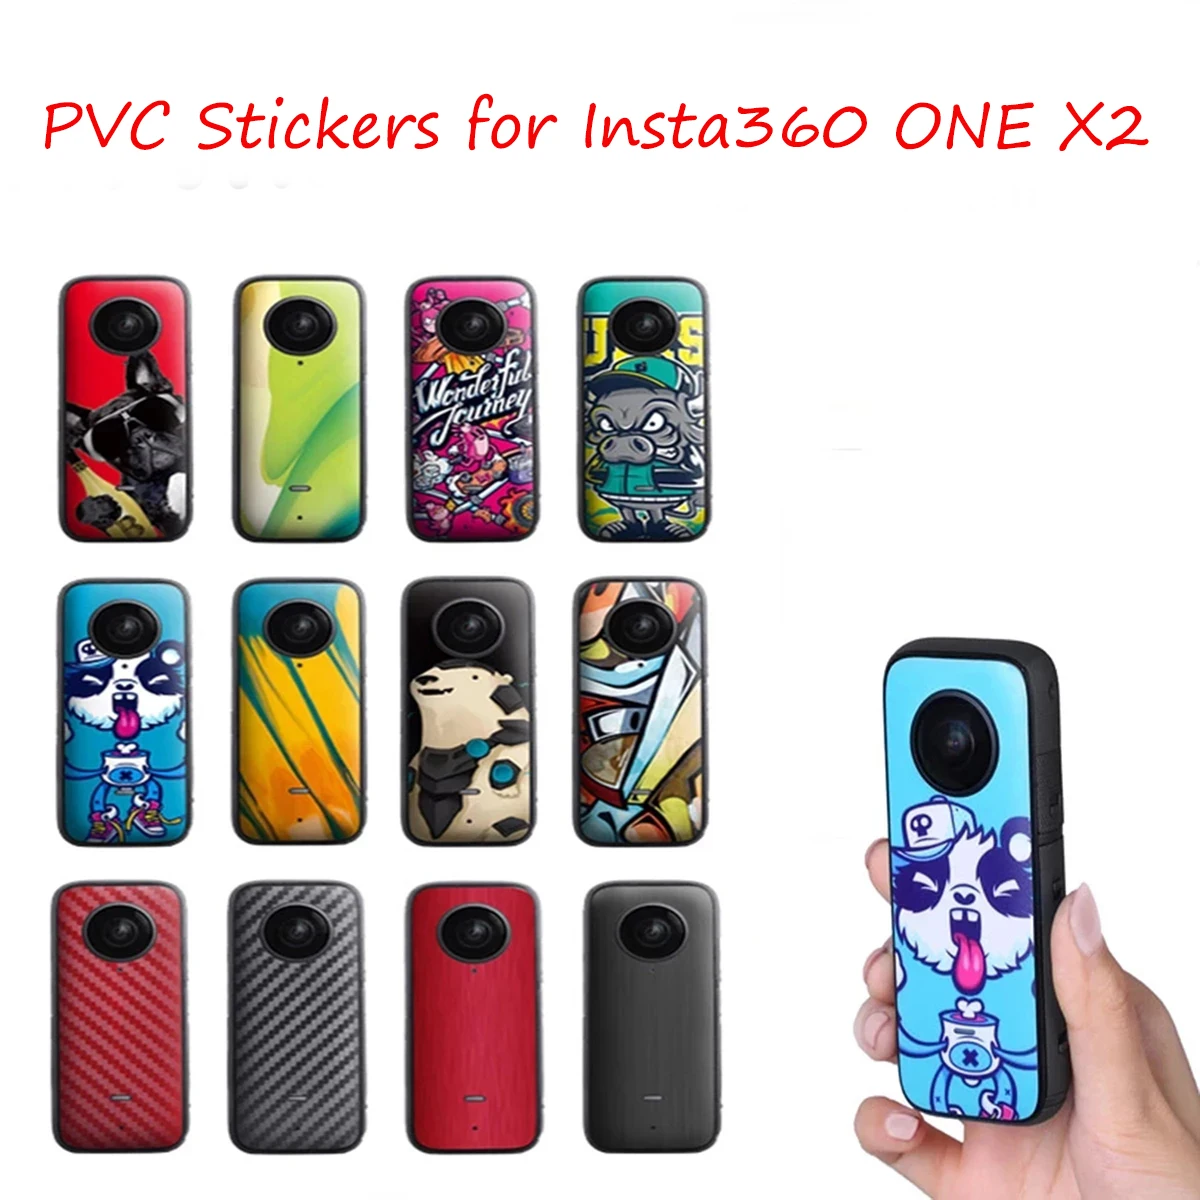 PVC Stickers for Insta360 ONE X2 Effective Waterproof Protection Skin Case Soft Decals Removable Scratch-Proof Cover Accessories